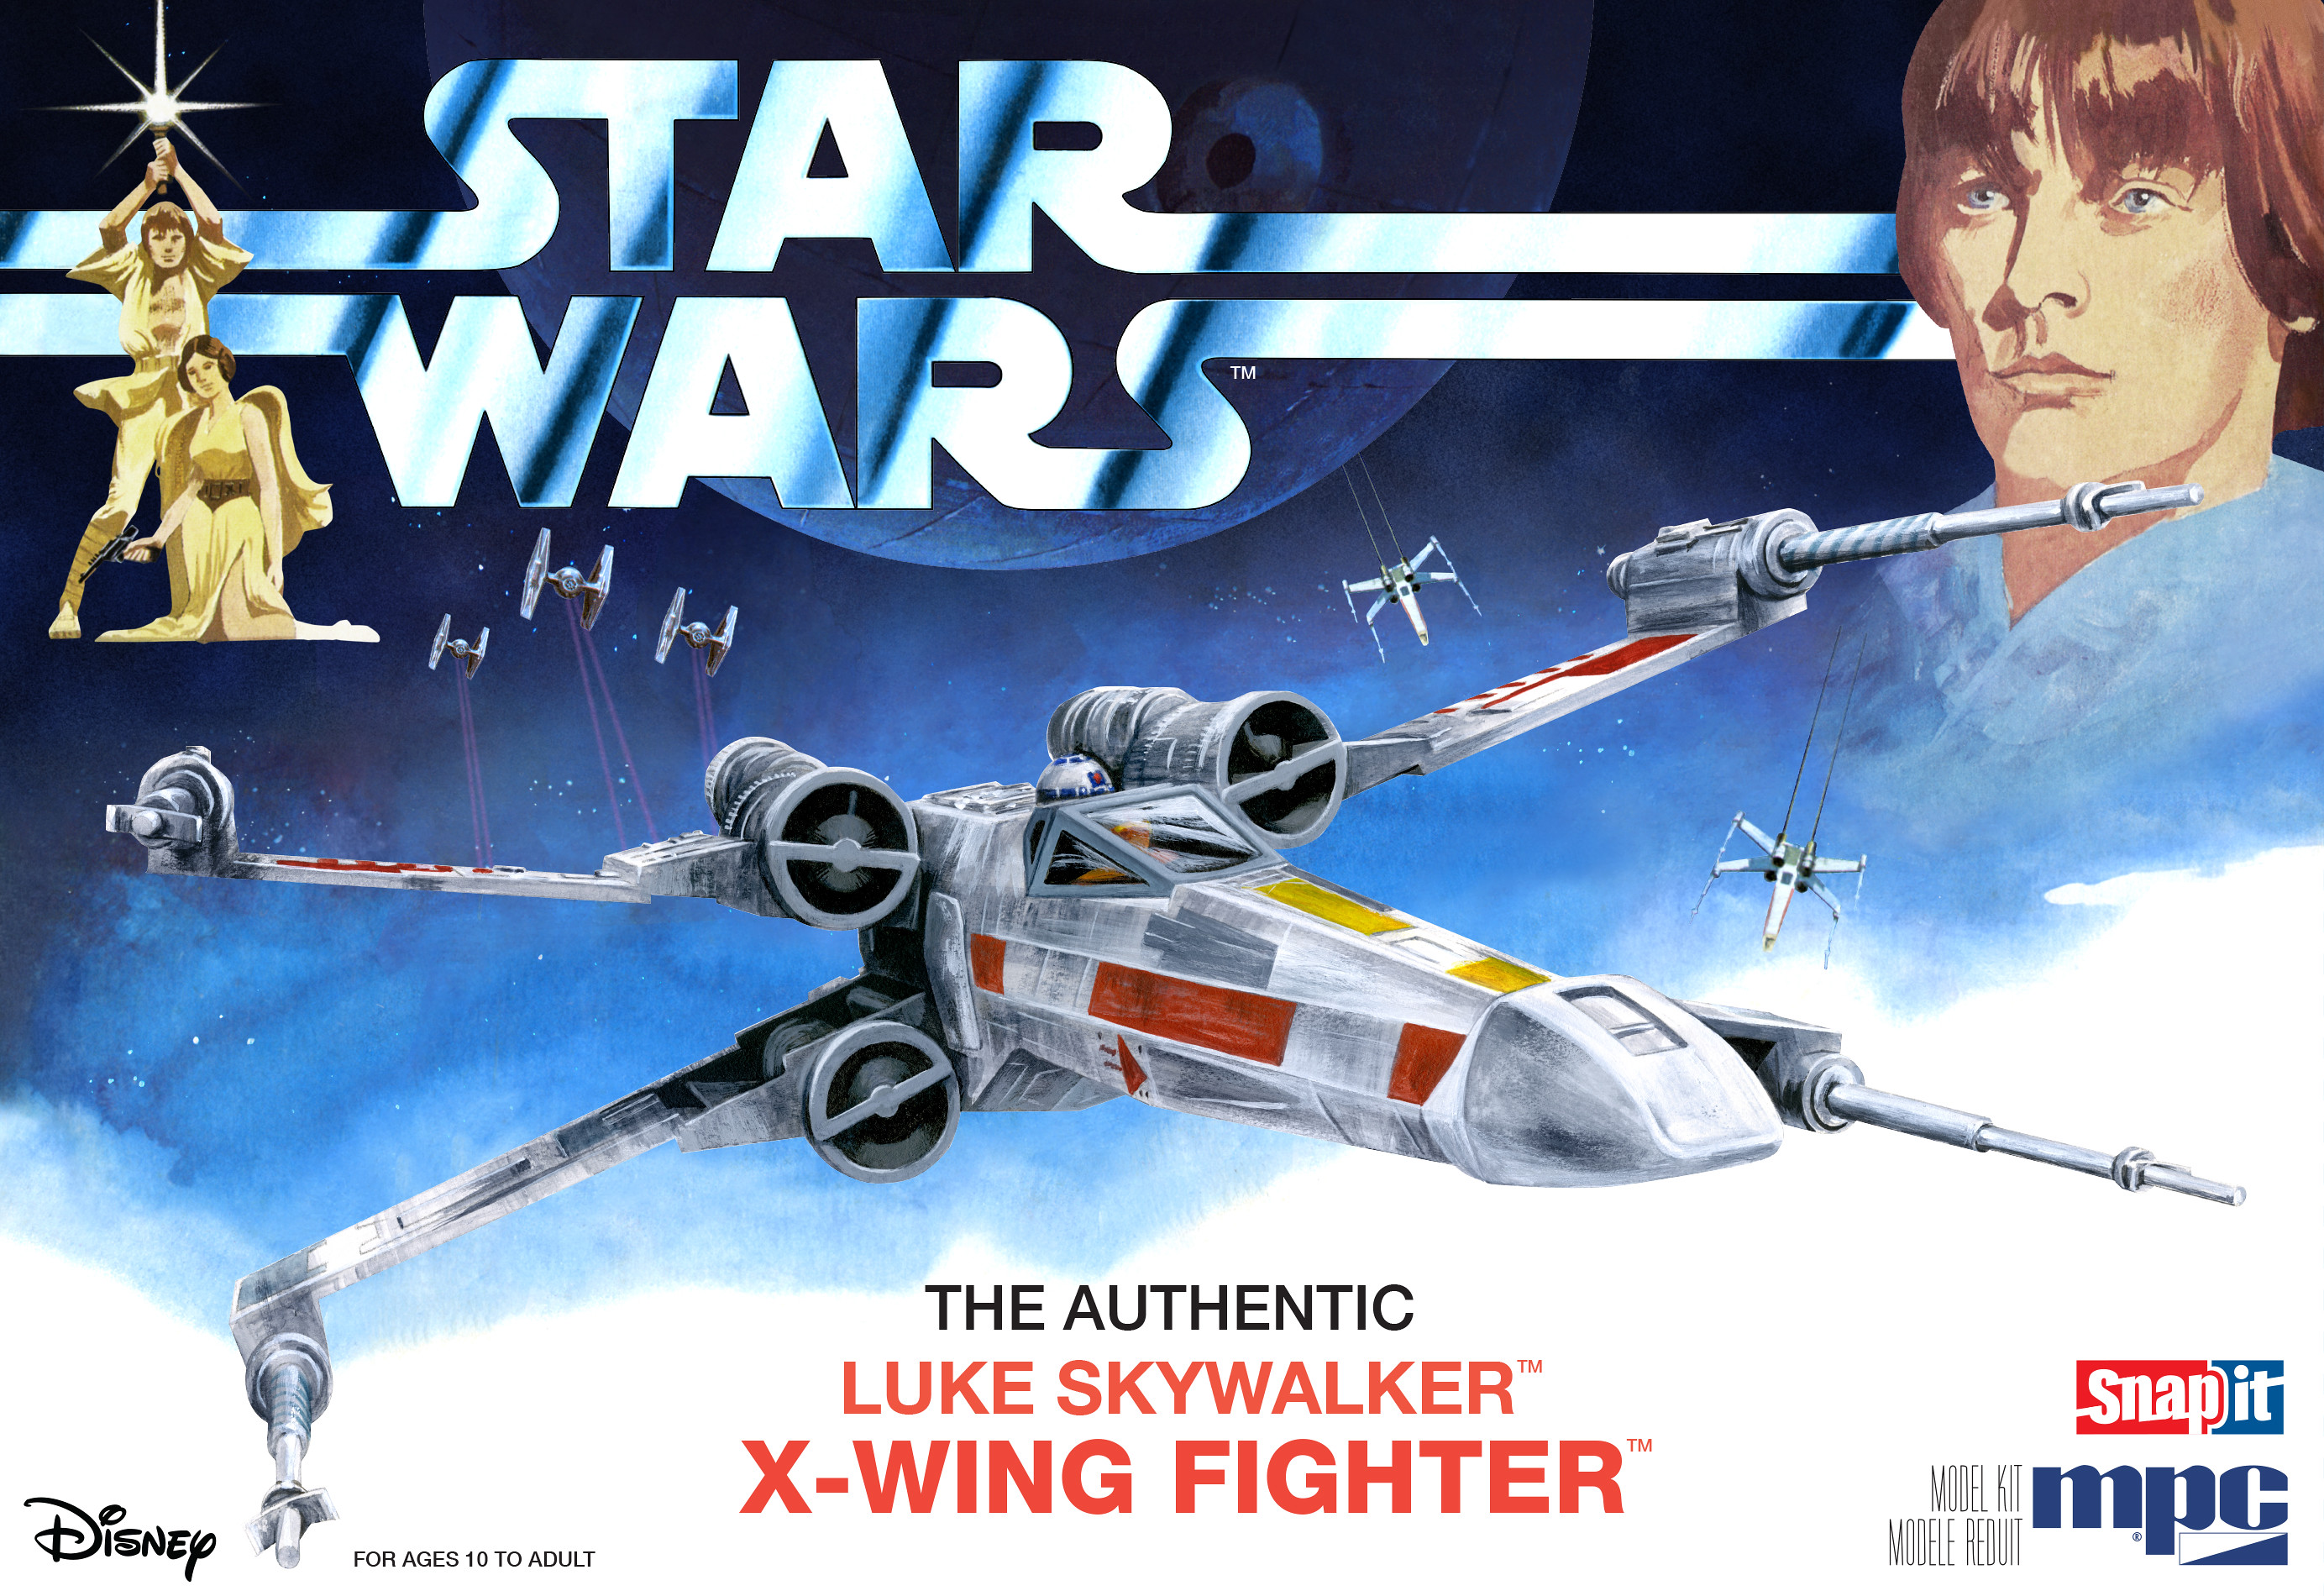 1/63 Star Wars A New Hope: X-Wing Fighter (Snap)